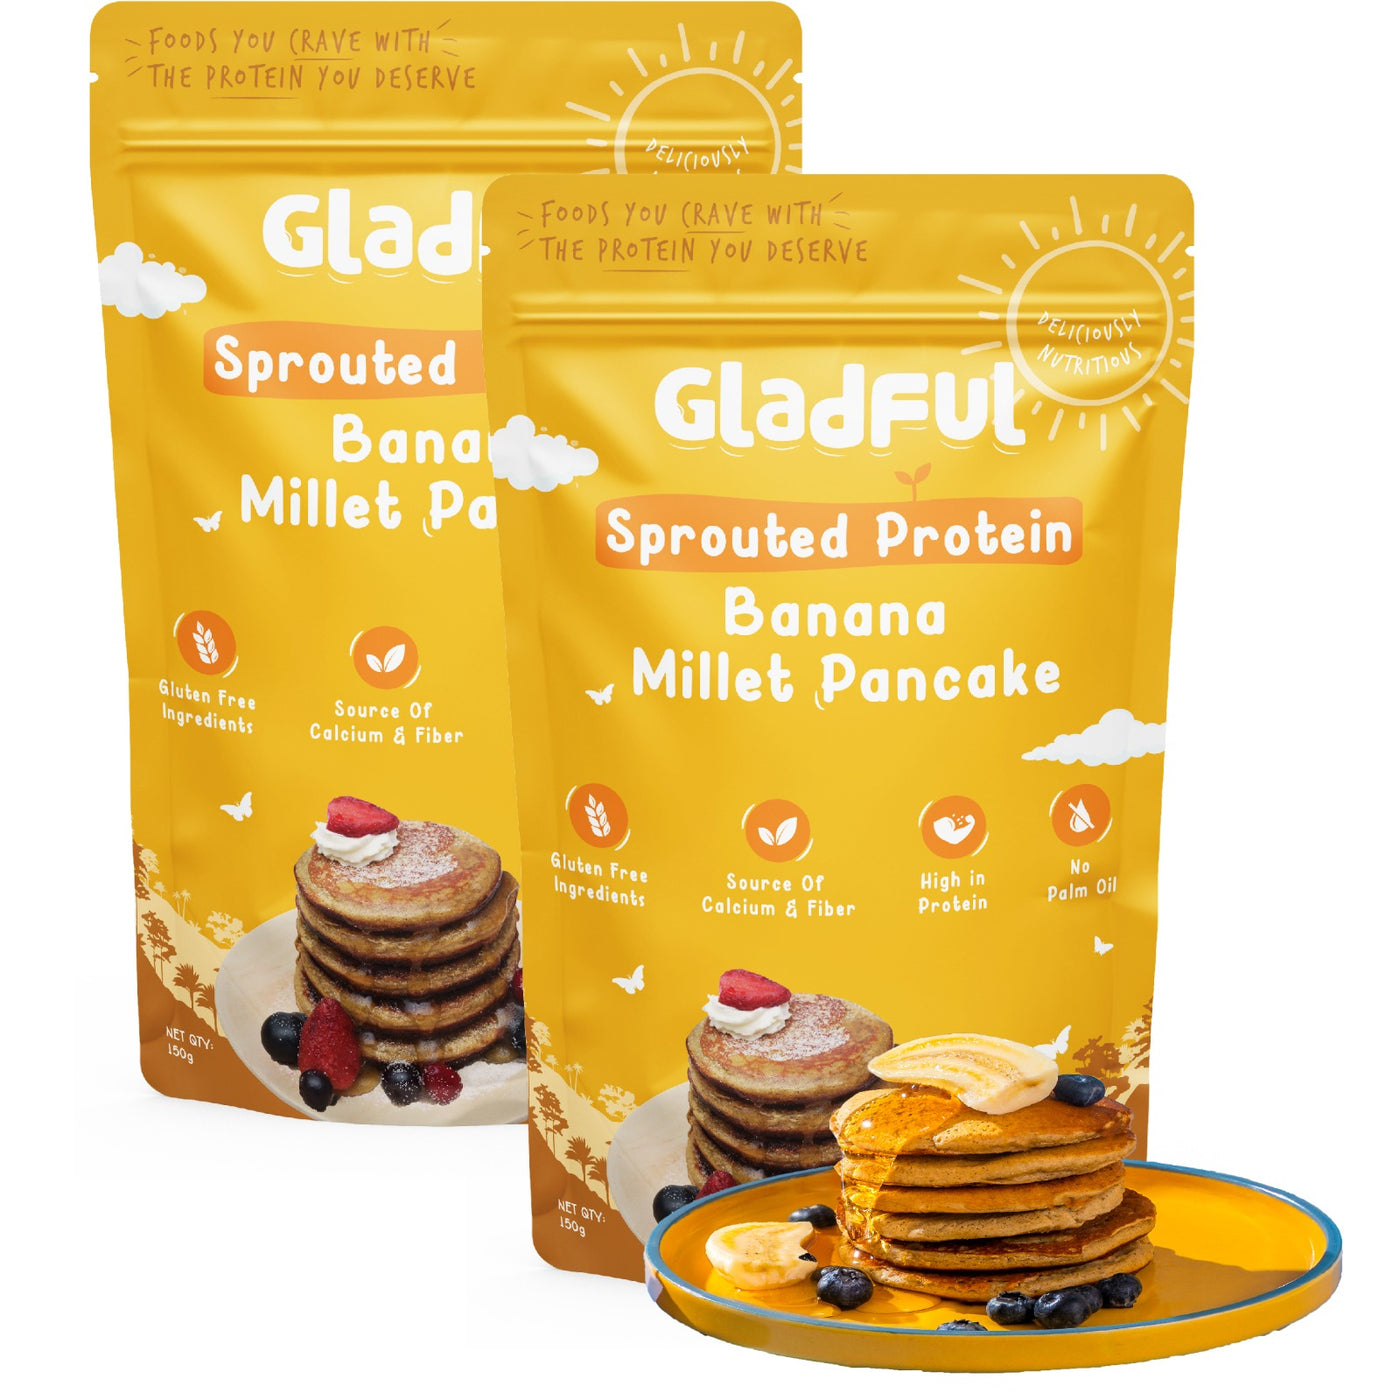 Sprouted pancake banana with millet lobia masoor protein for kids & families - pack of 2 - 300 gms